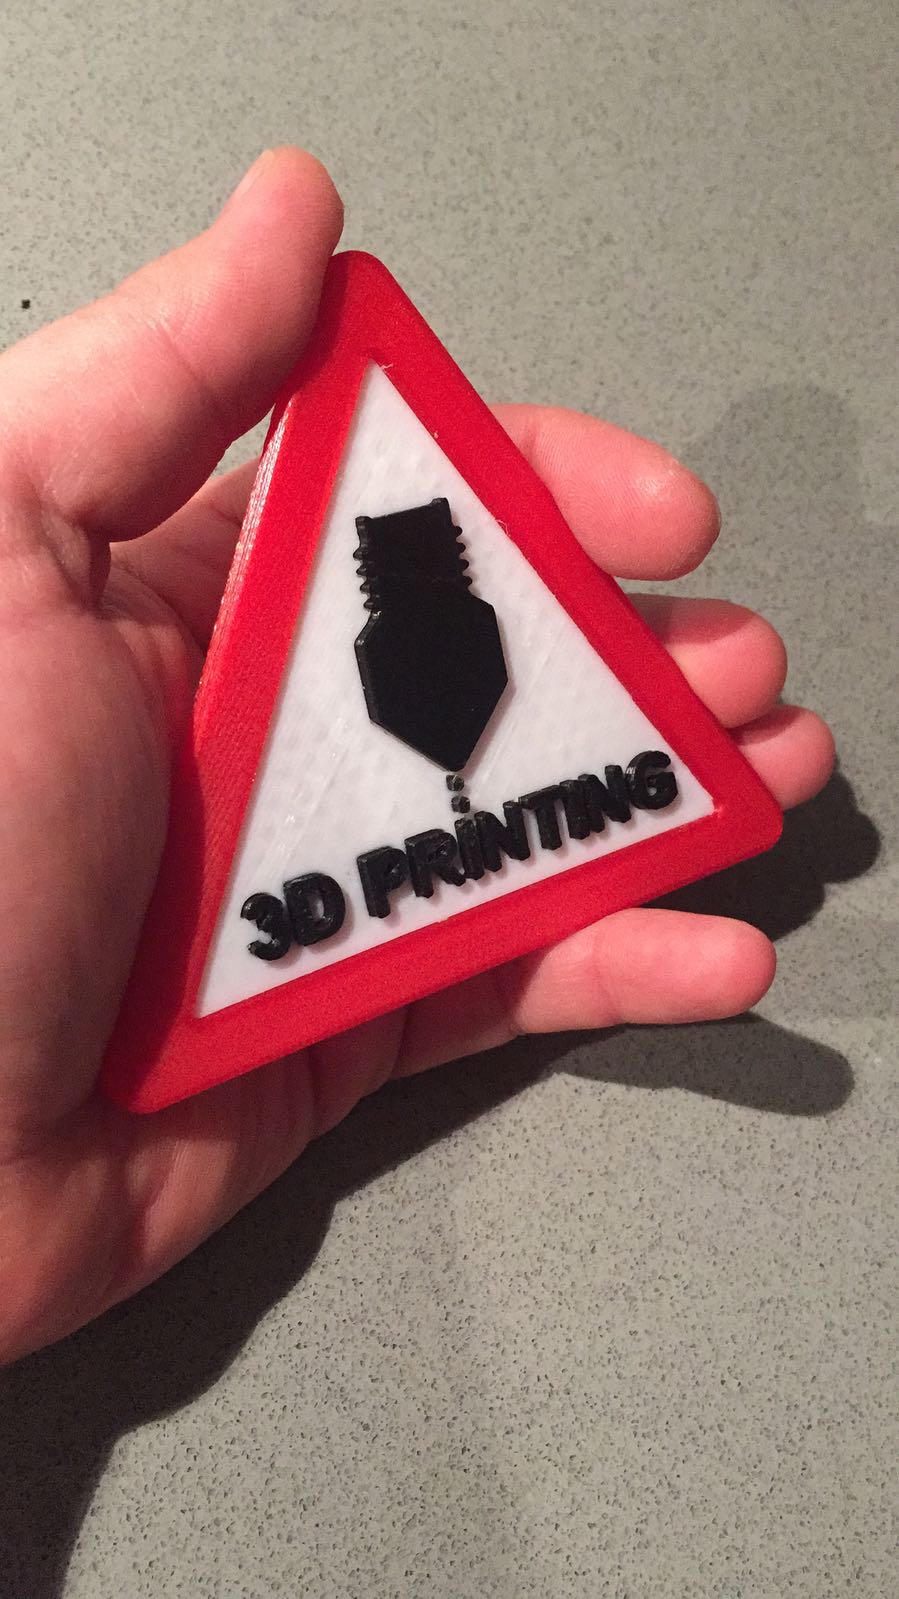 3D PRINTING sign to put at your print place